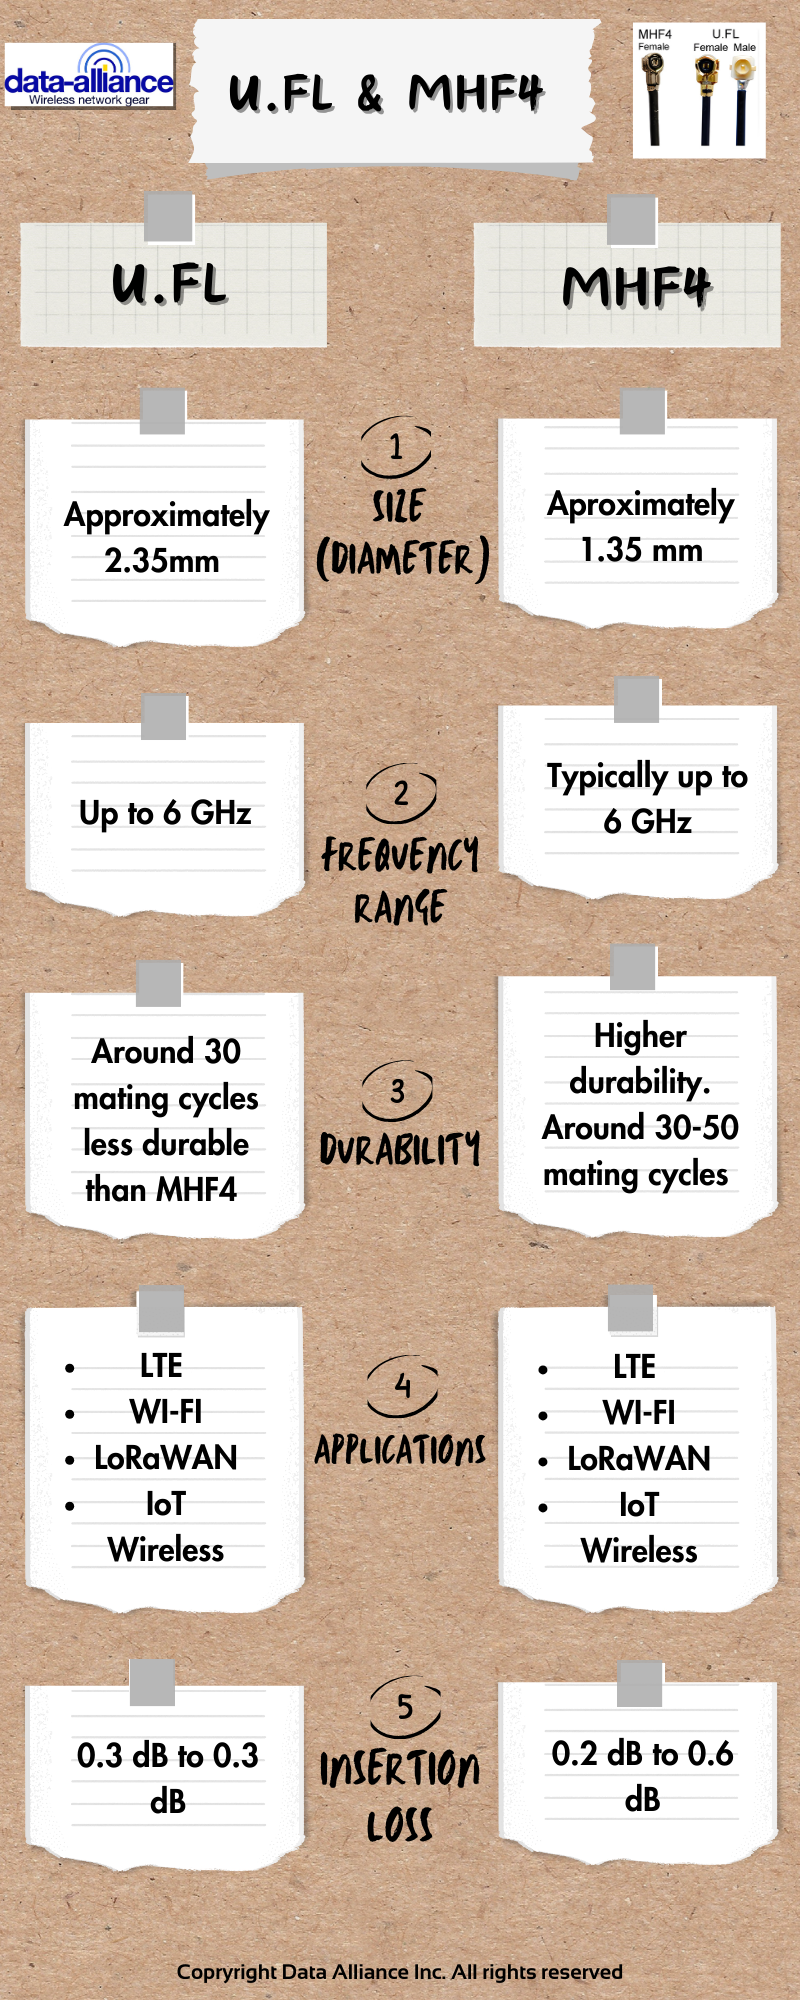 MHF4 and U.FL cables and connectors specifications compared